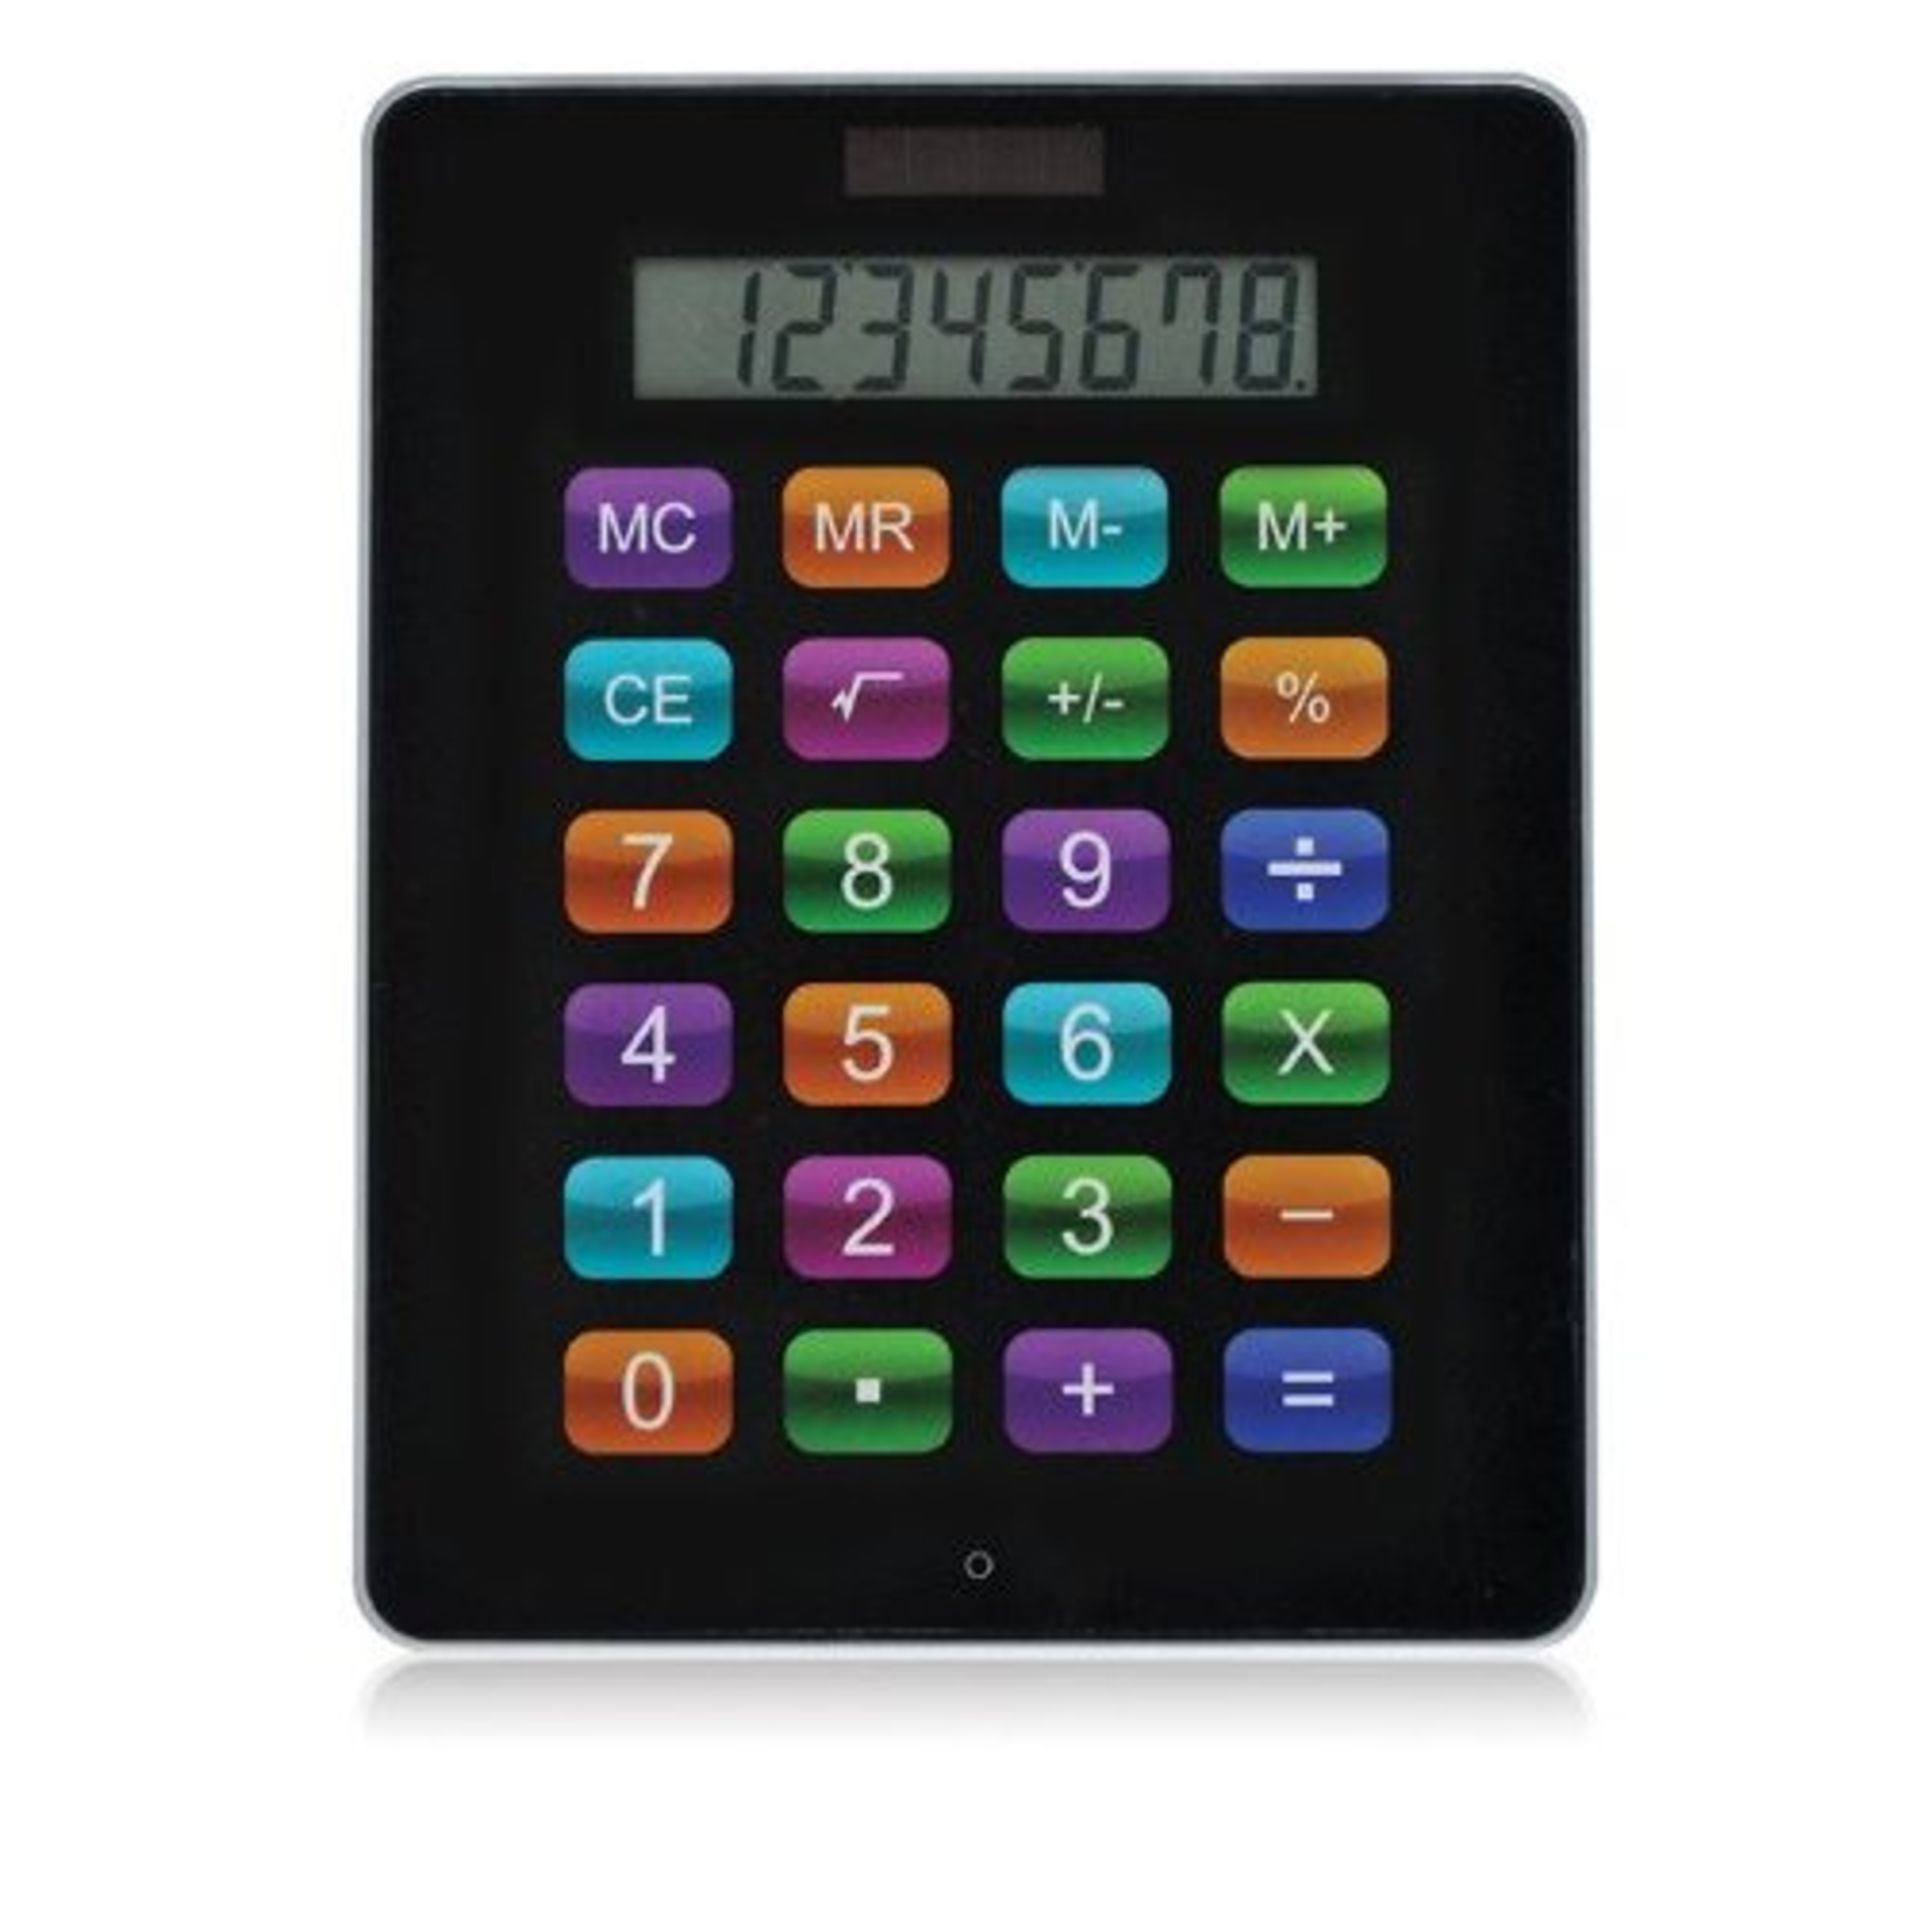 V Brand New Ipad Calculator-Battery powered with solar backup X 3 Bid price to be multiplied by - Image 4 of 4